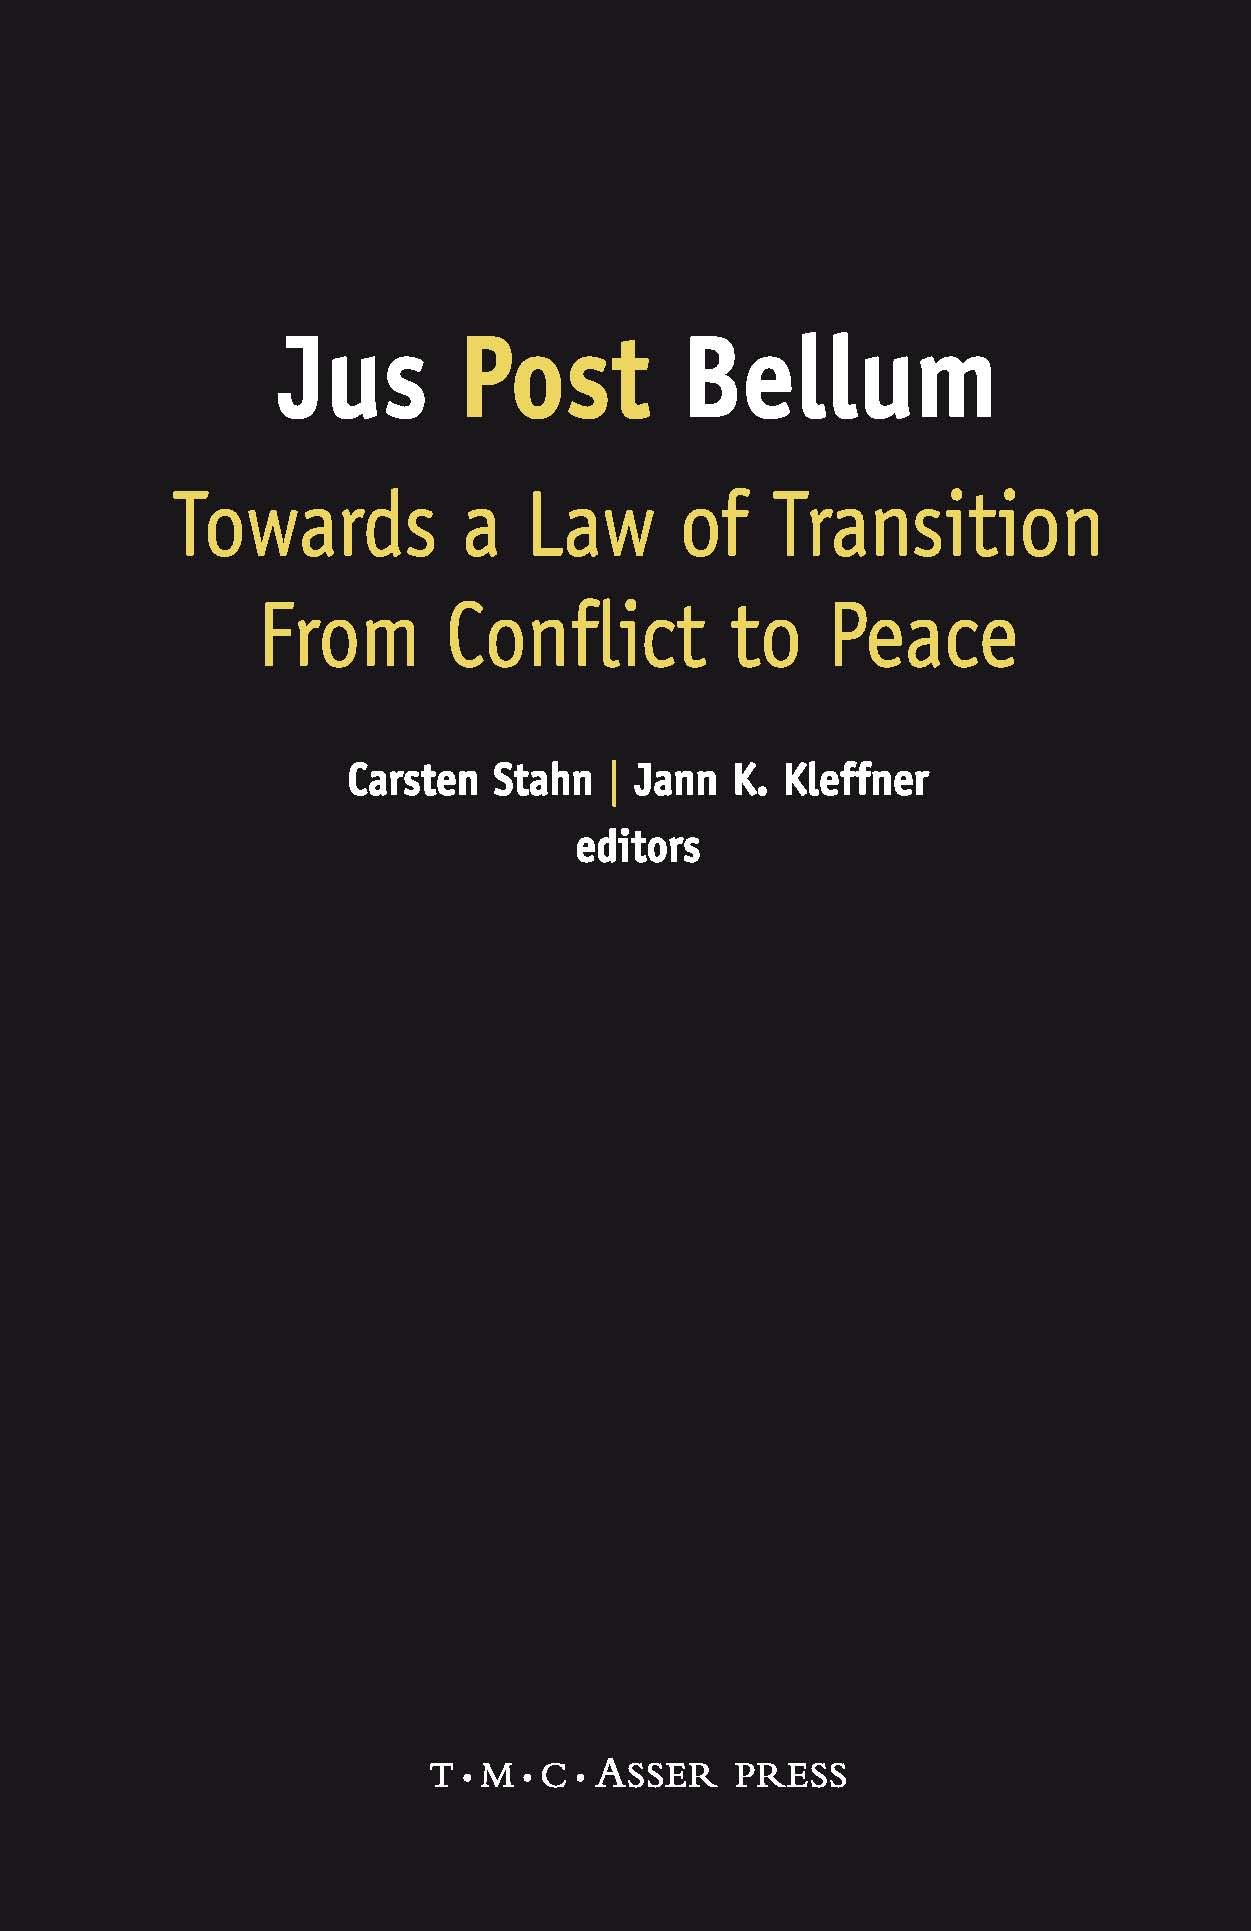 Jus Post Bellum - Towards a Law of Transition From Conflict to Peace